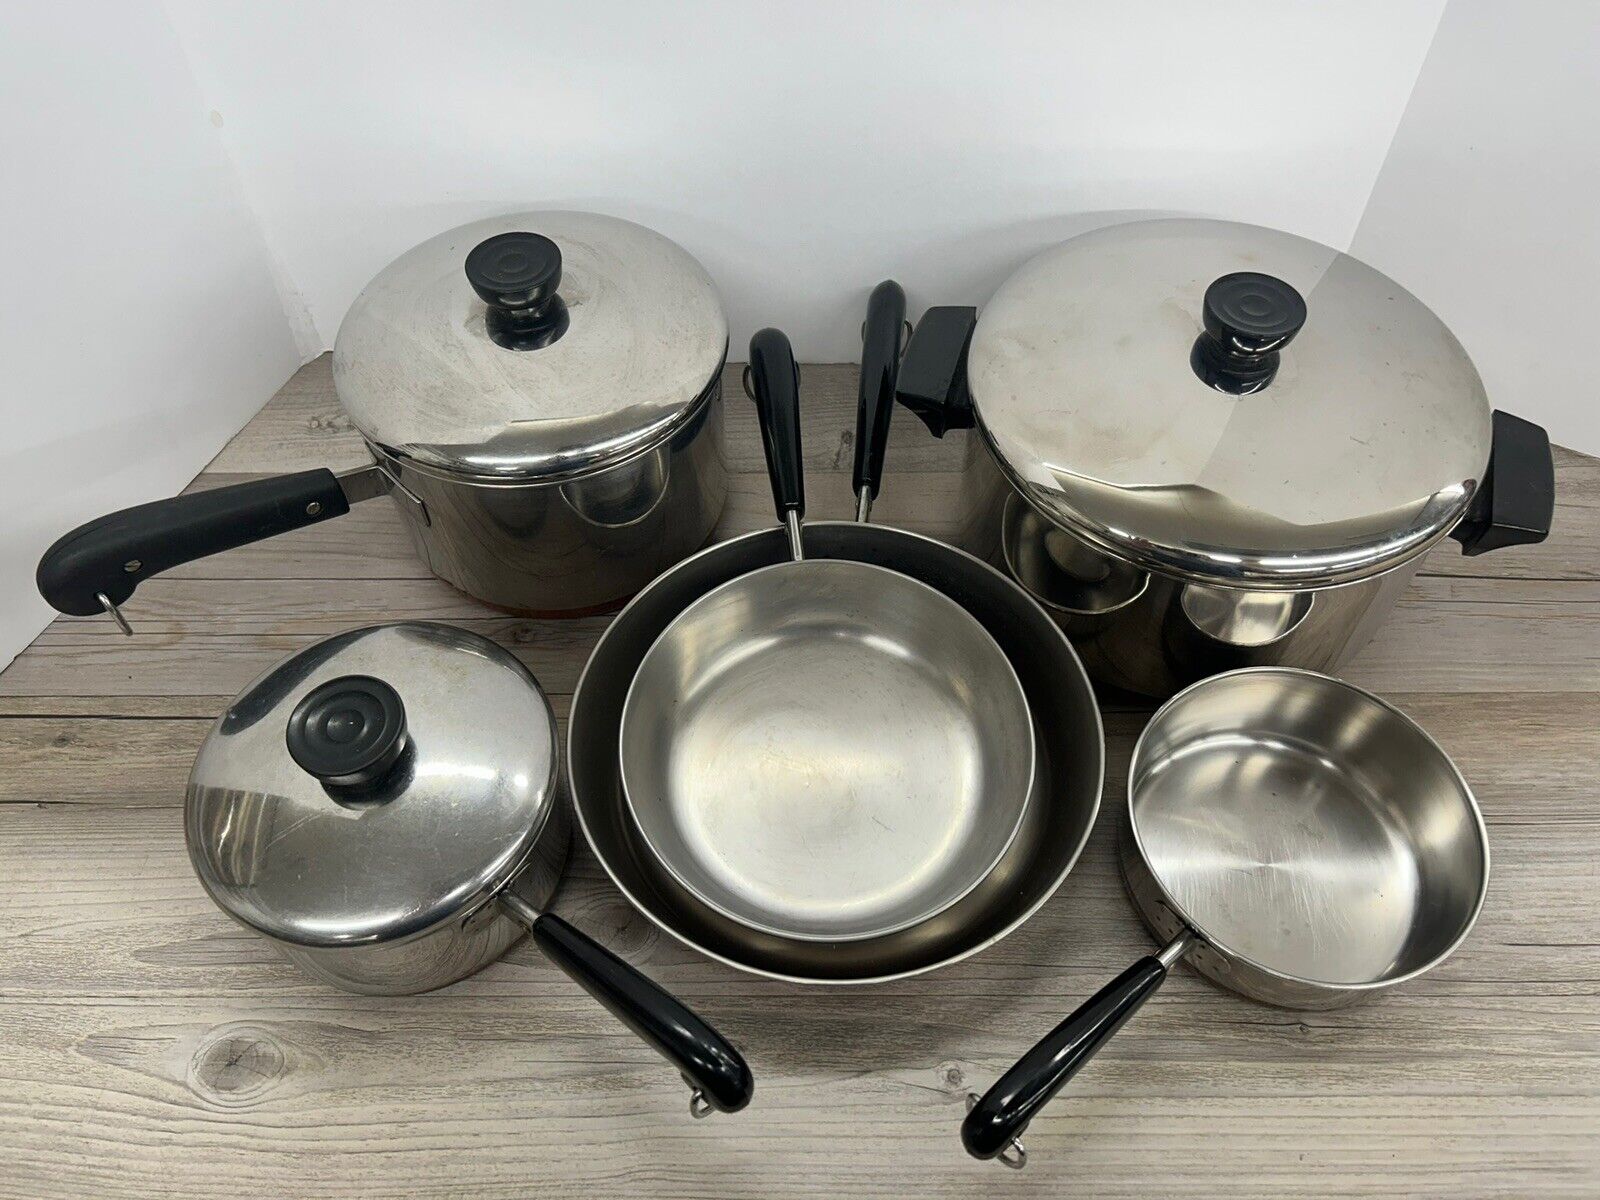 Lot Of 9 Pc.  Vintage Revere Ware Copper Bottom Sauce Pans  American Made.